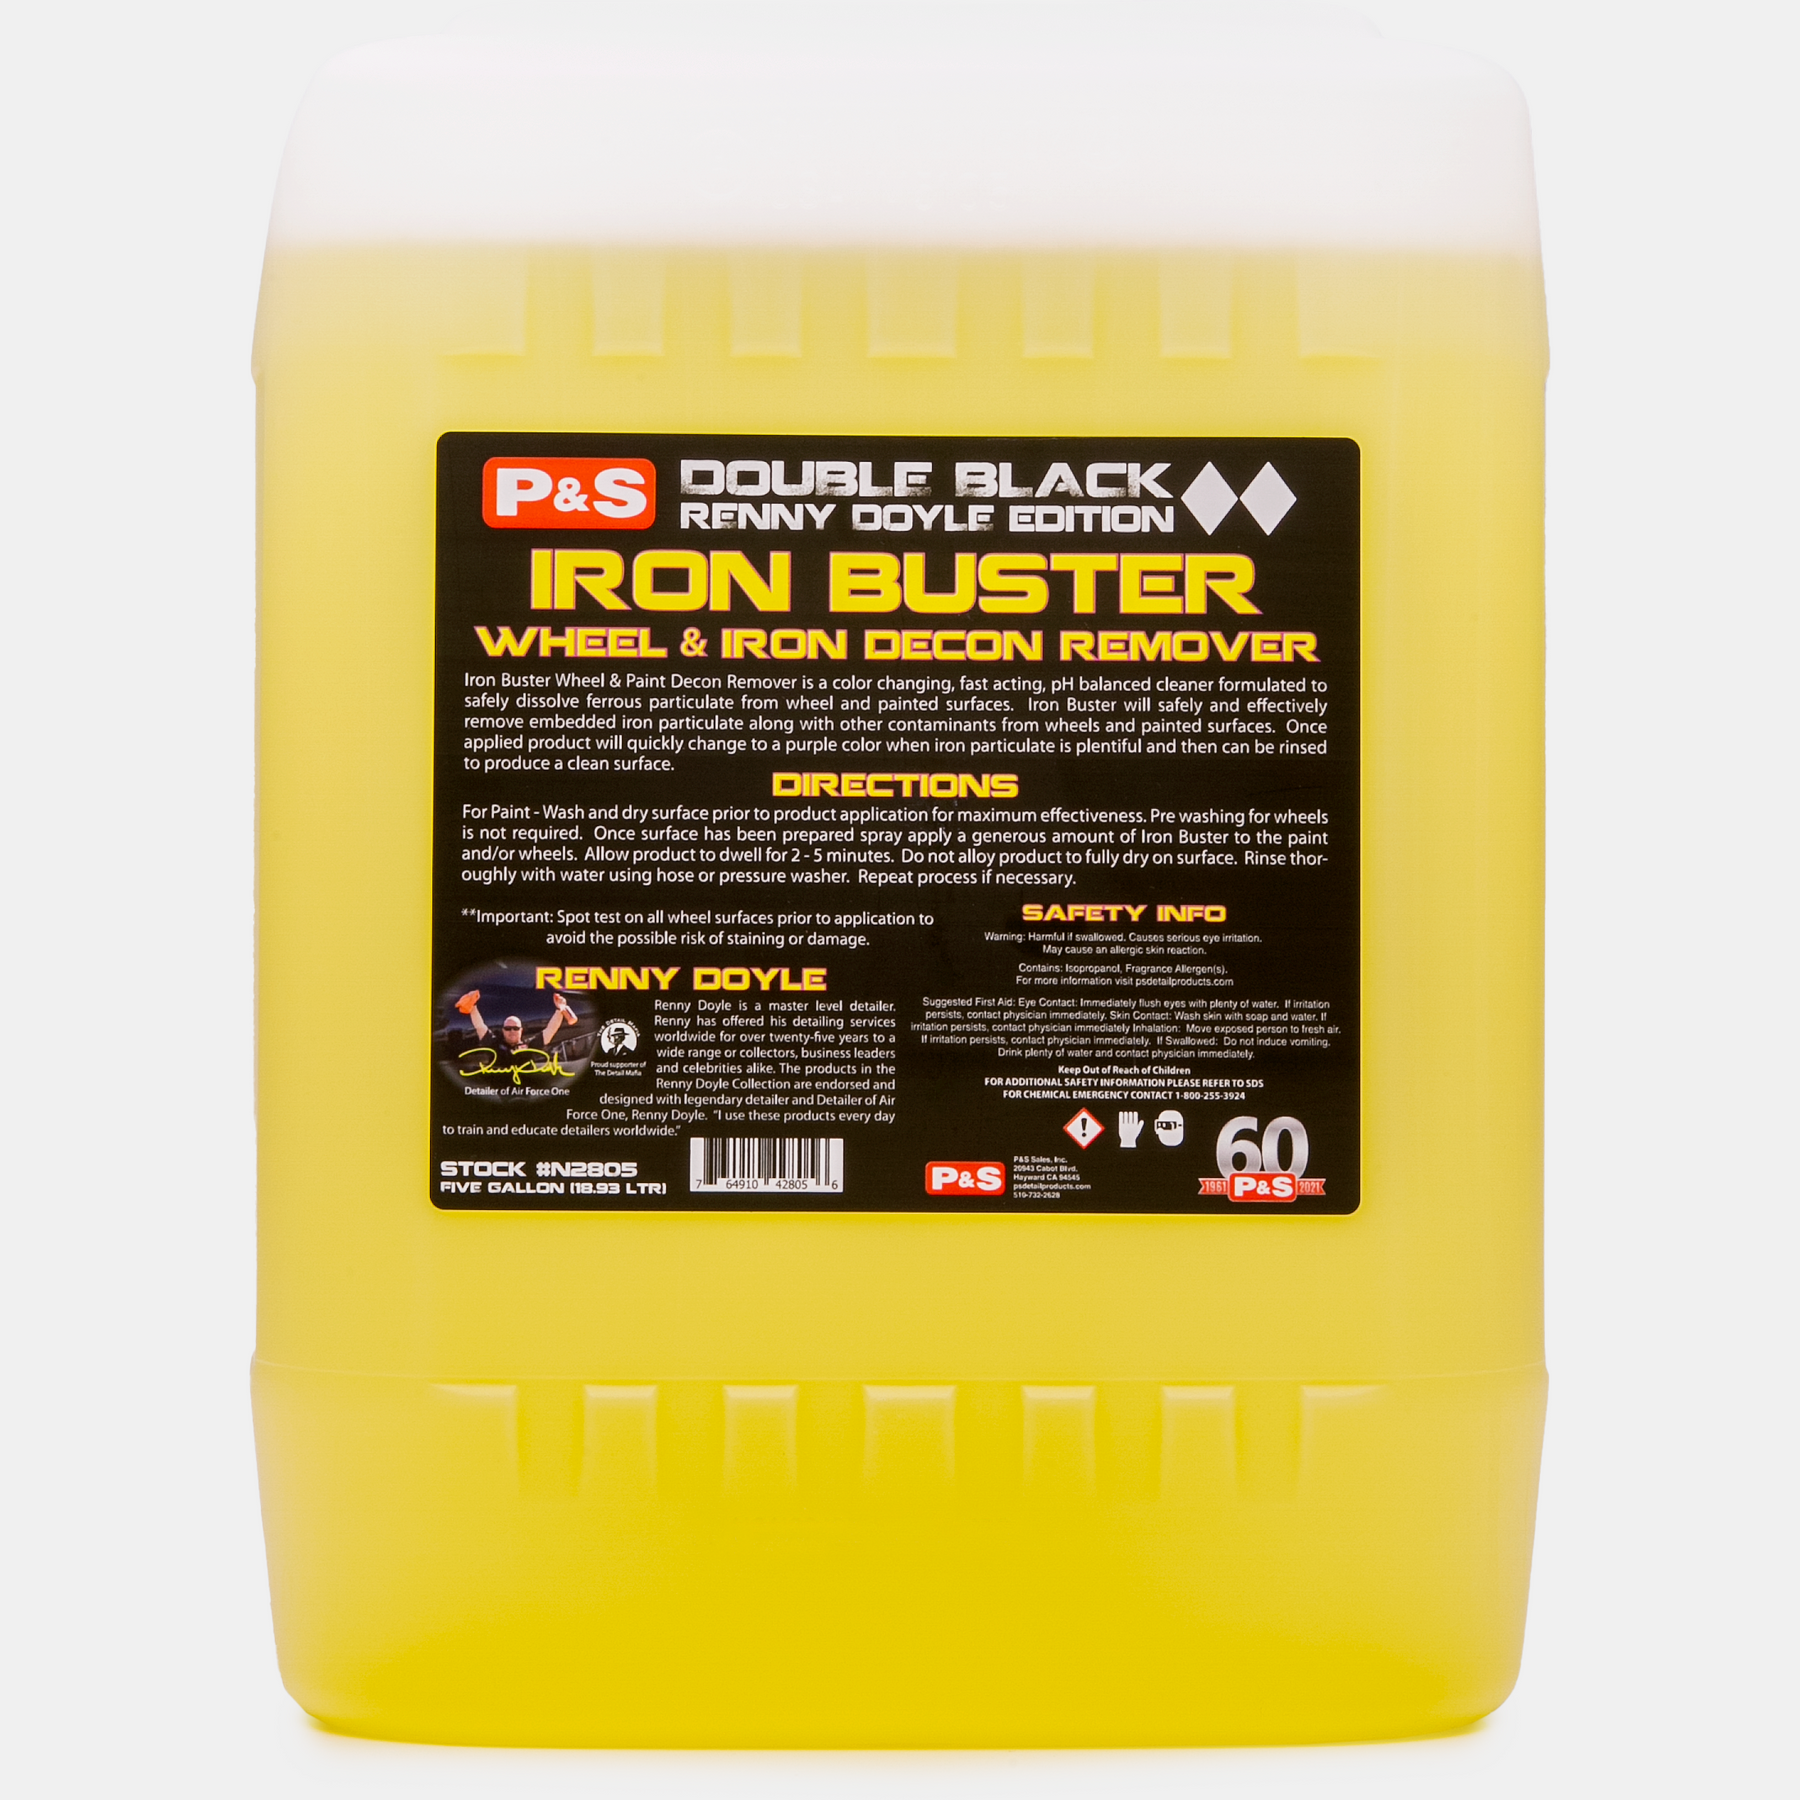 P&S IRON BUSTER WHEEL & PAINT DECON REMOVER